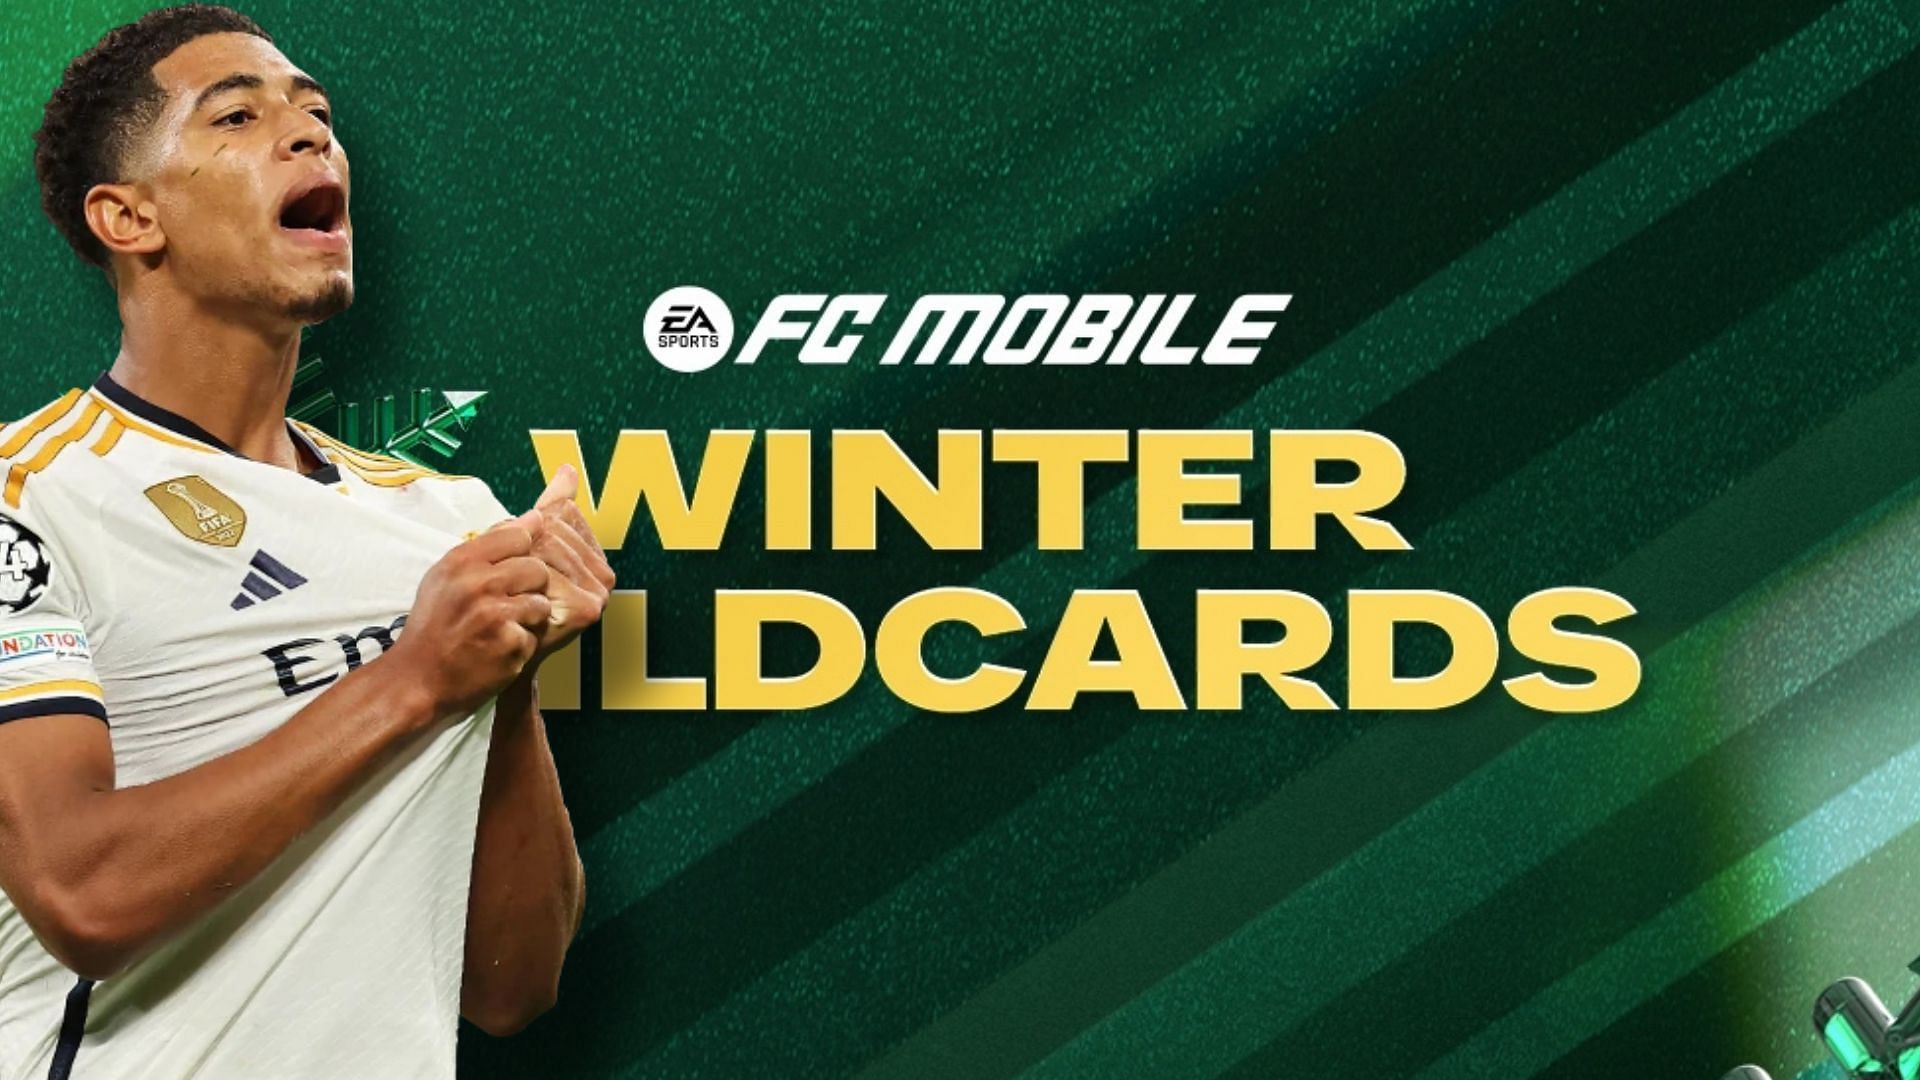 FC Mobile Winter Wildcards Passing Training course offers many rewards (Image via EA Sports) 